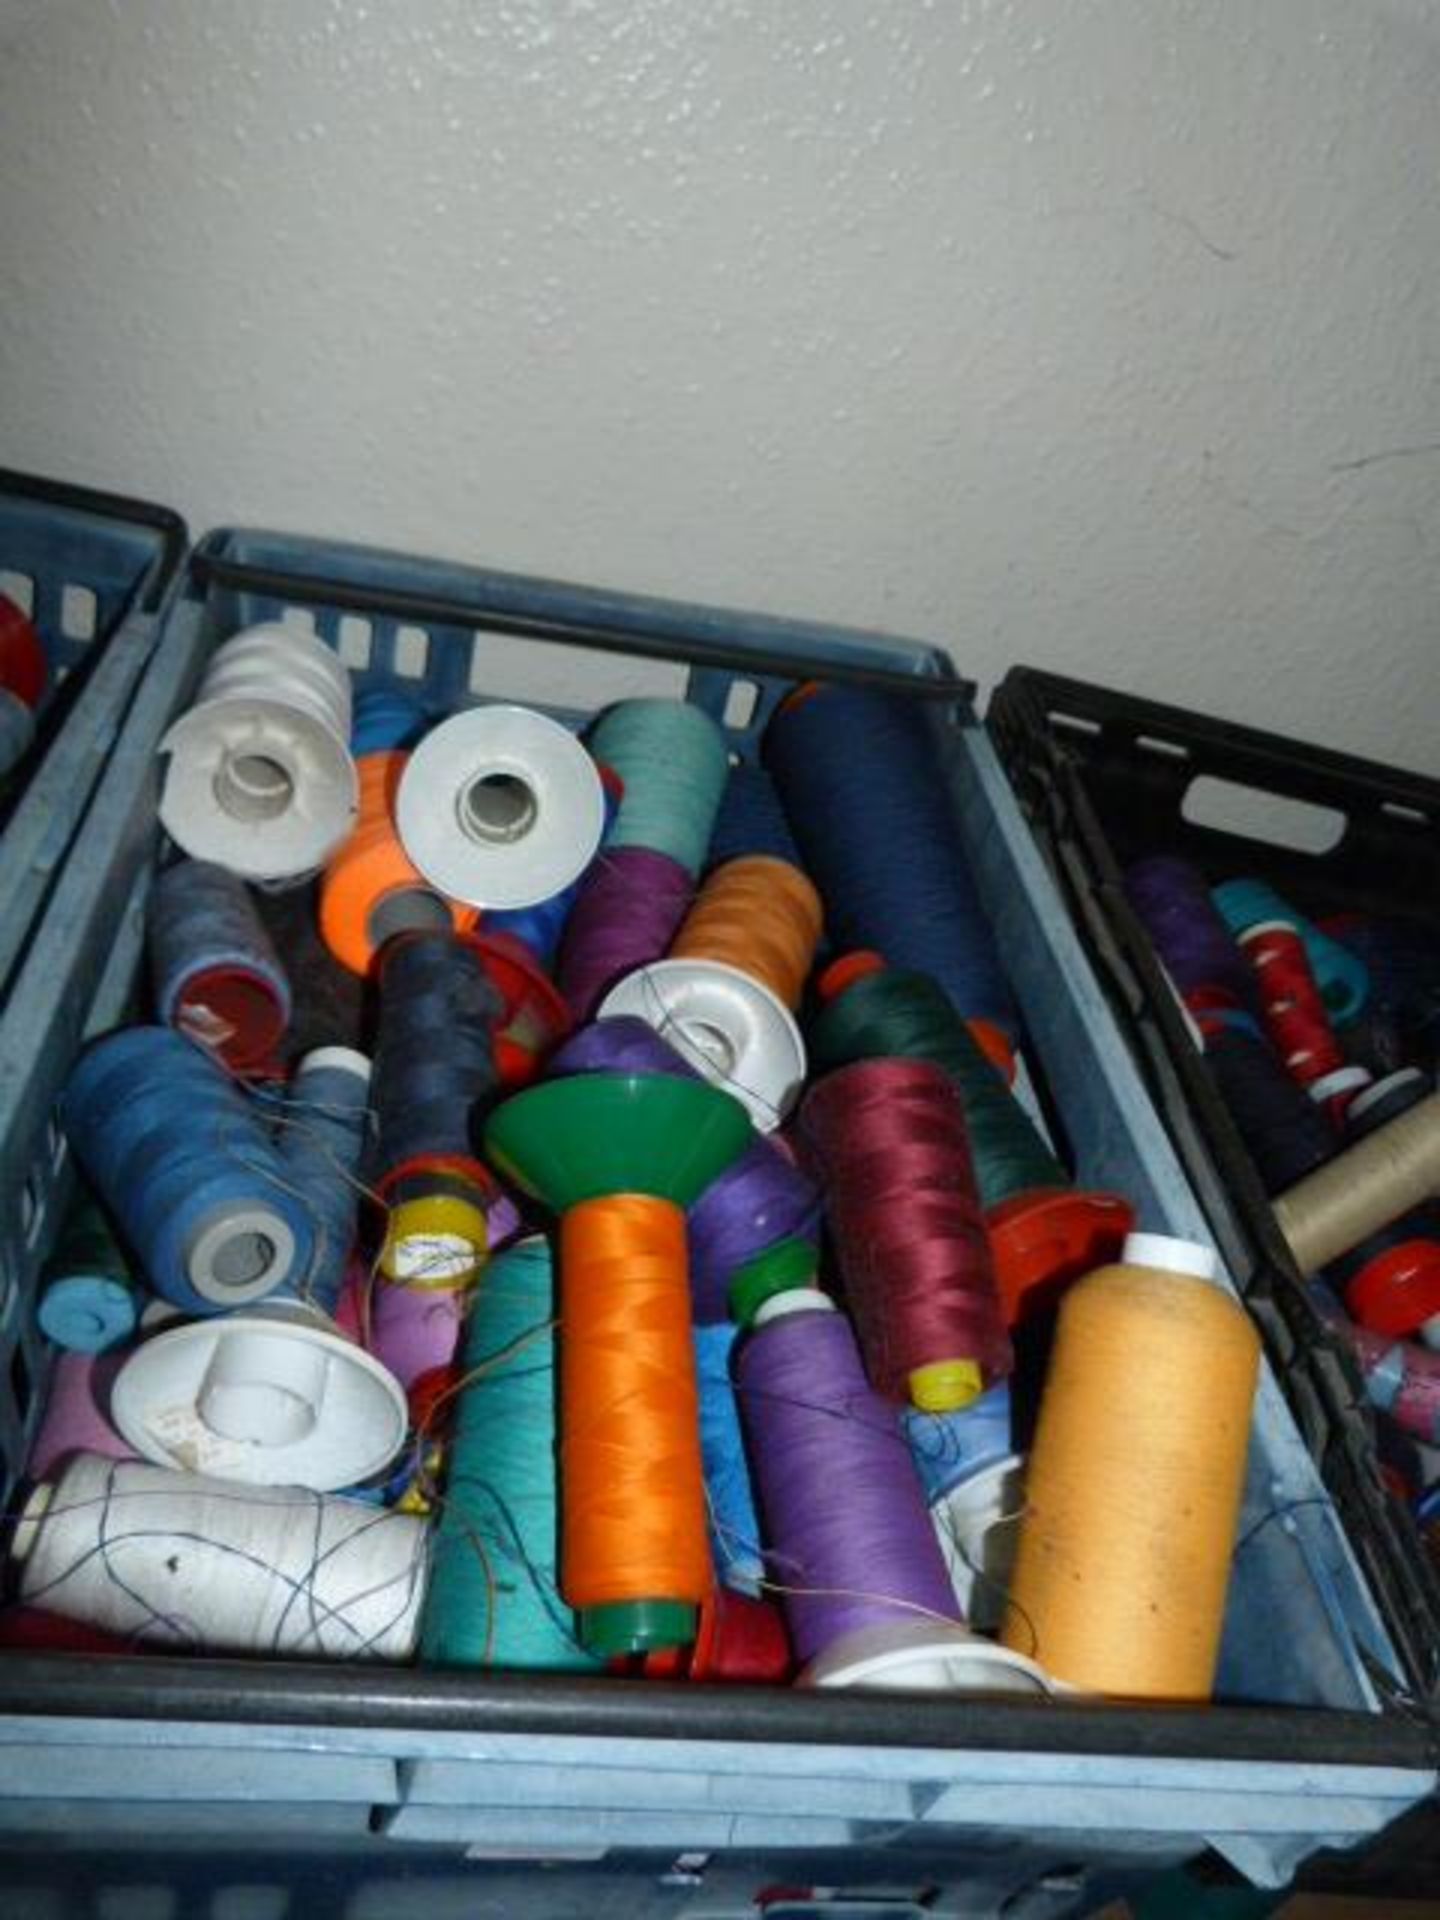 ~50 Spools of Assorted Part Used Thread and Yarn